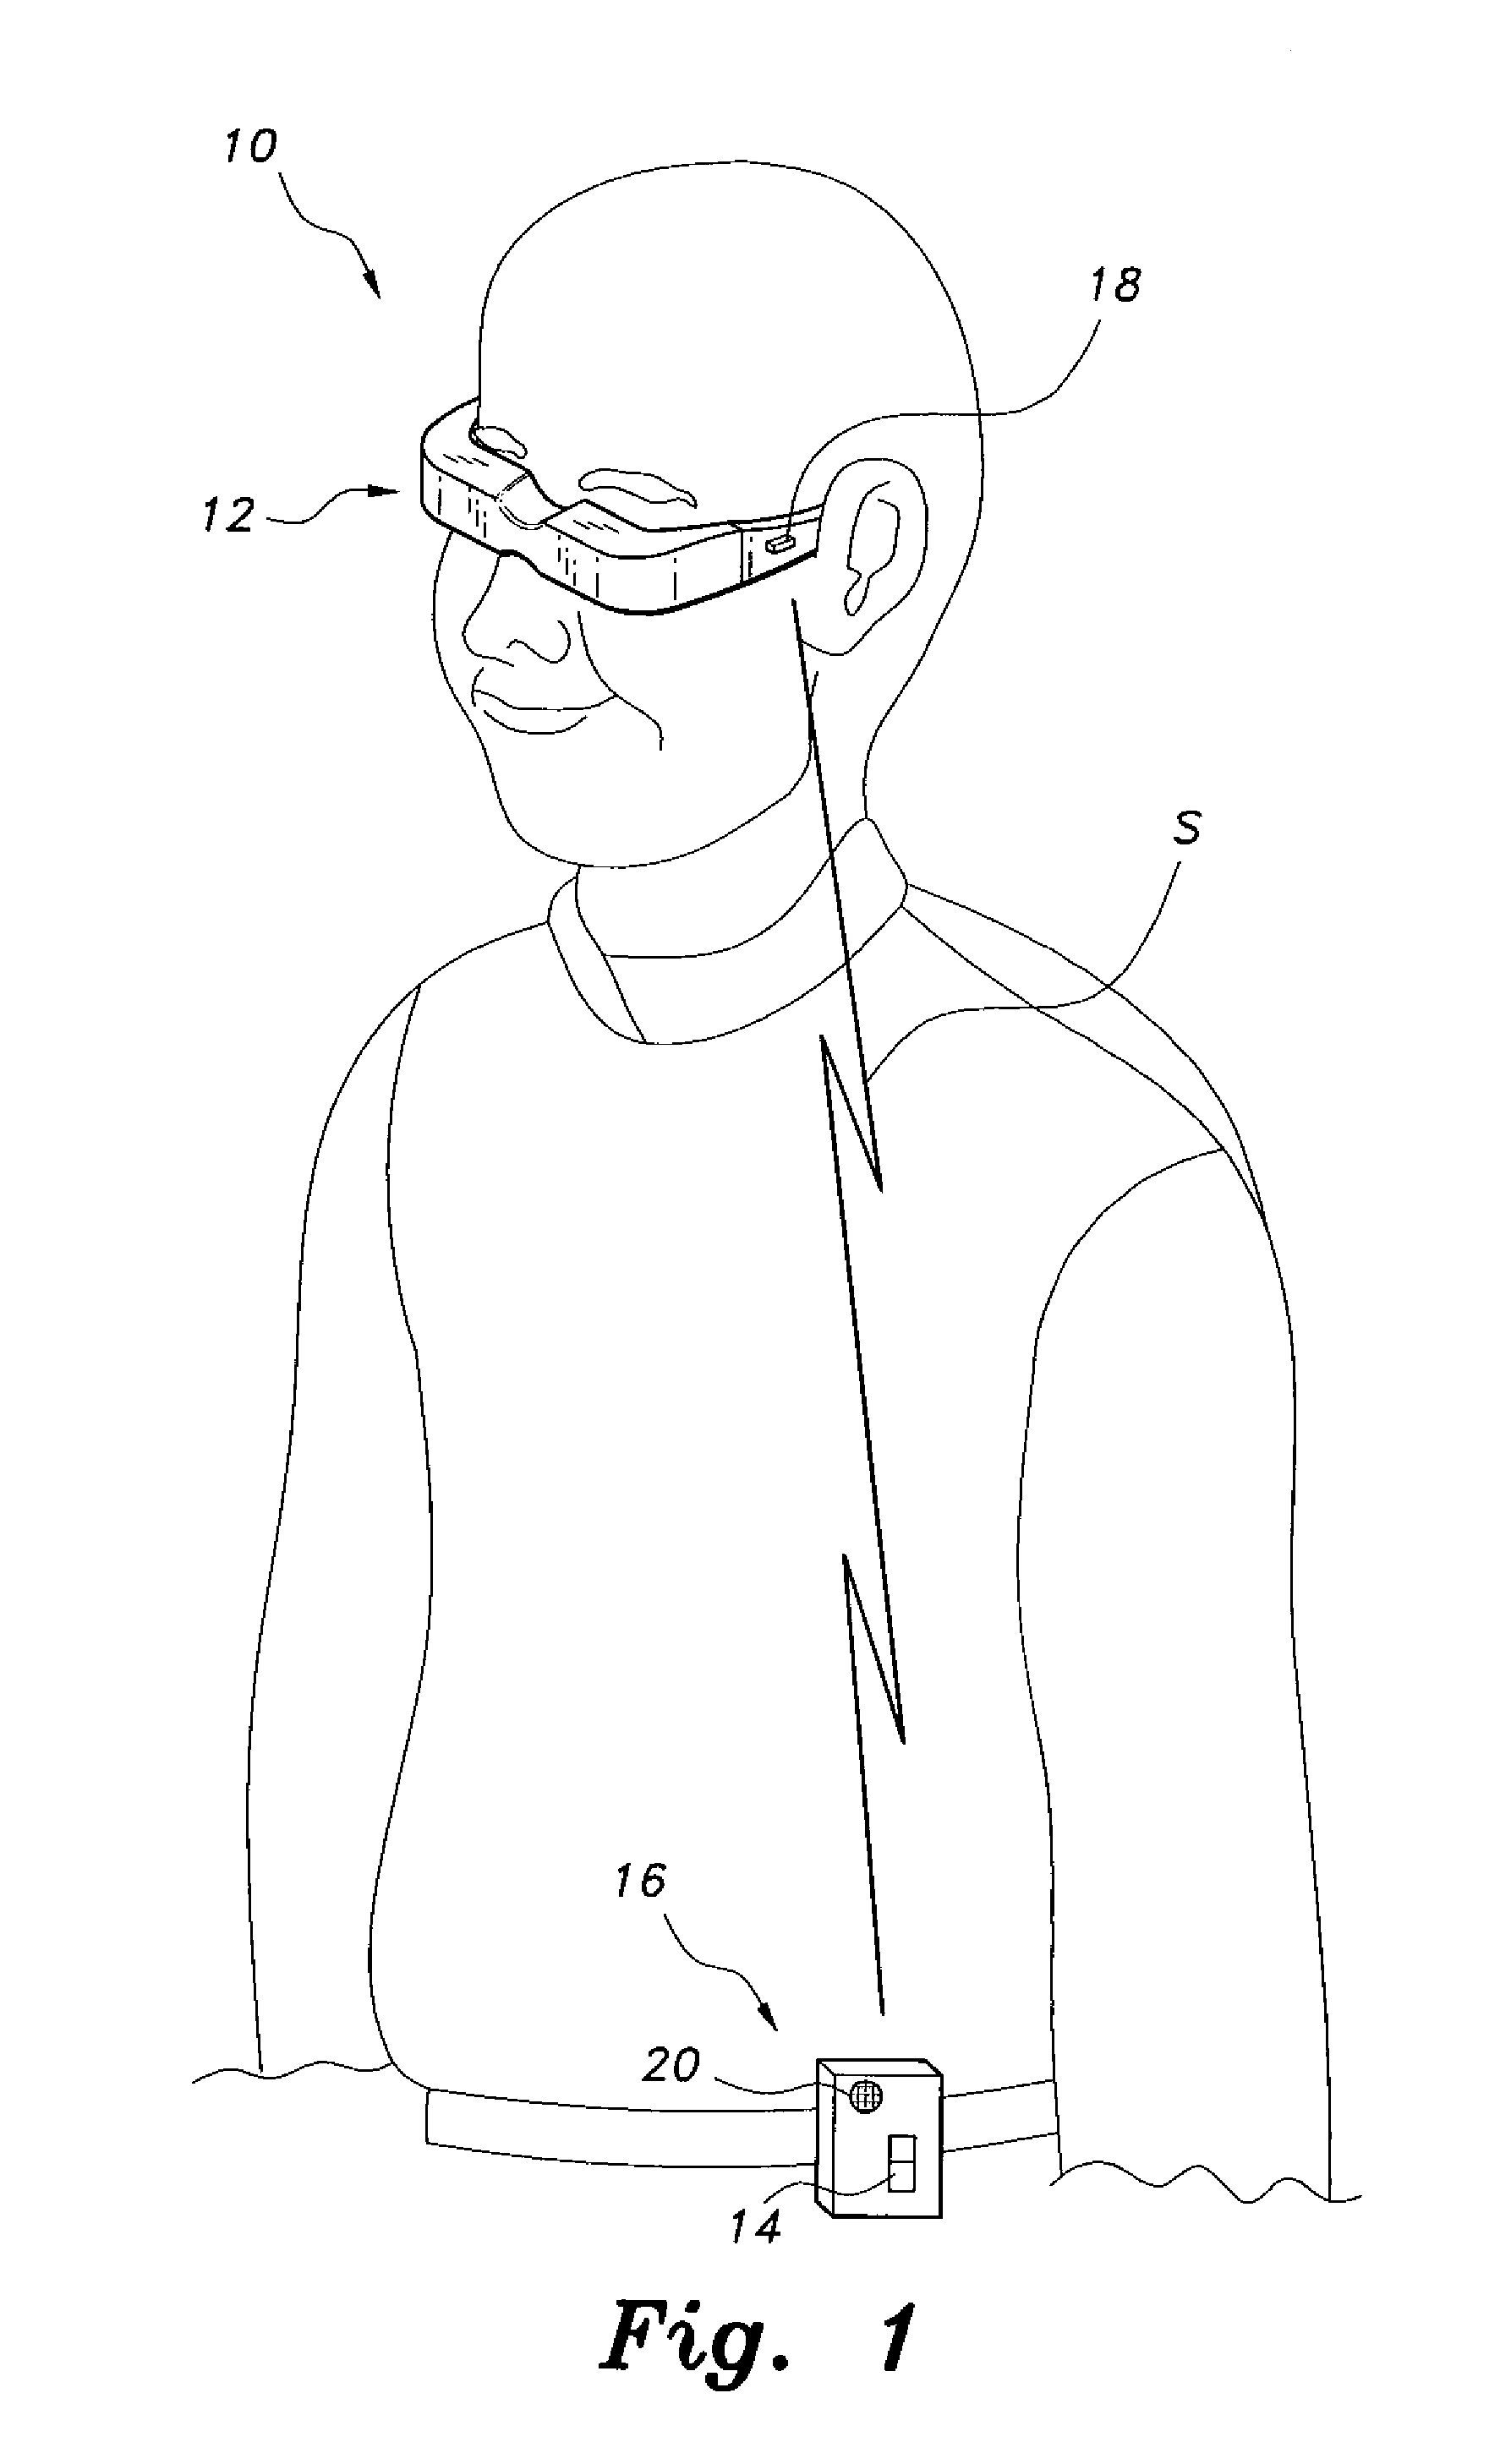 Head-mounted text display system and method for the hearing impaired